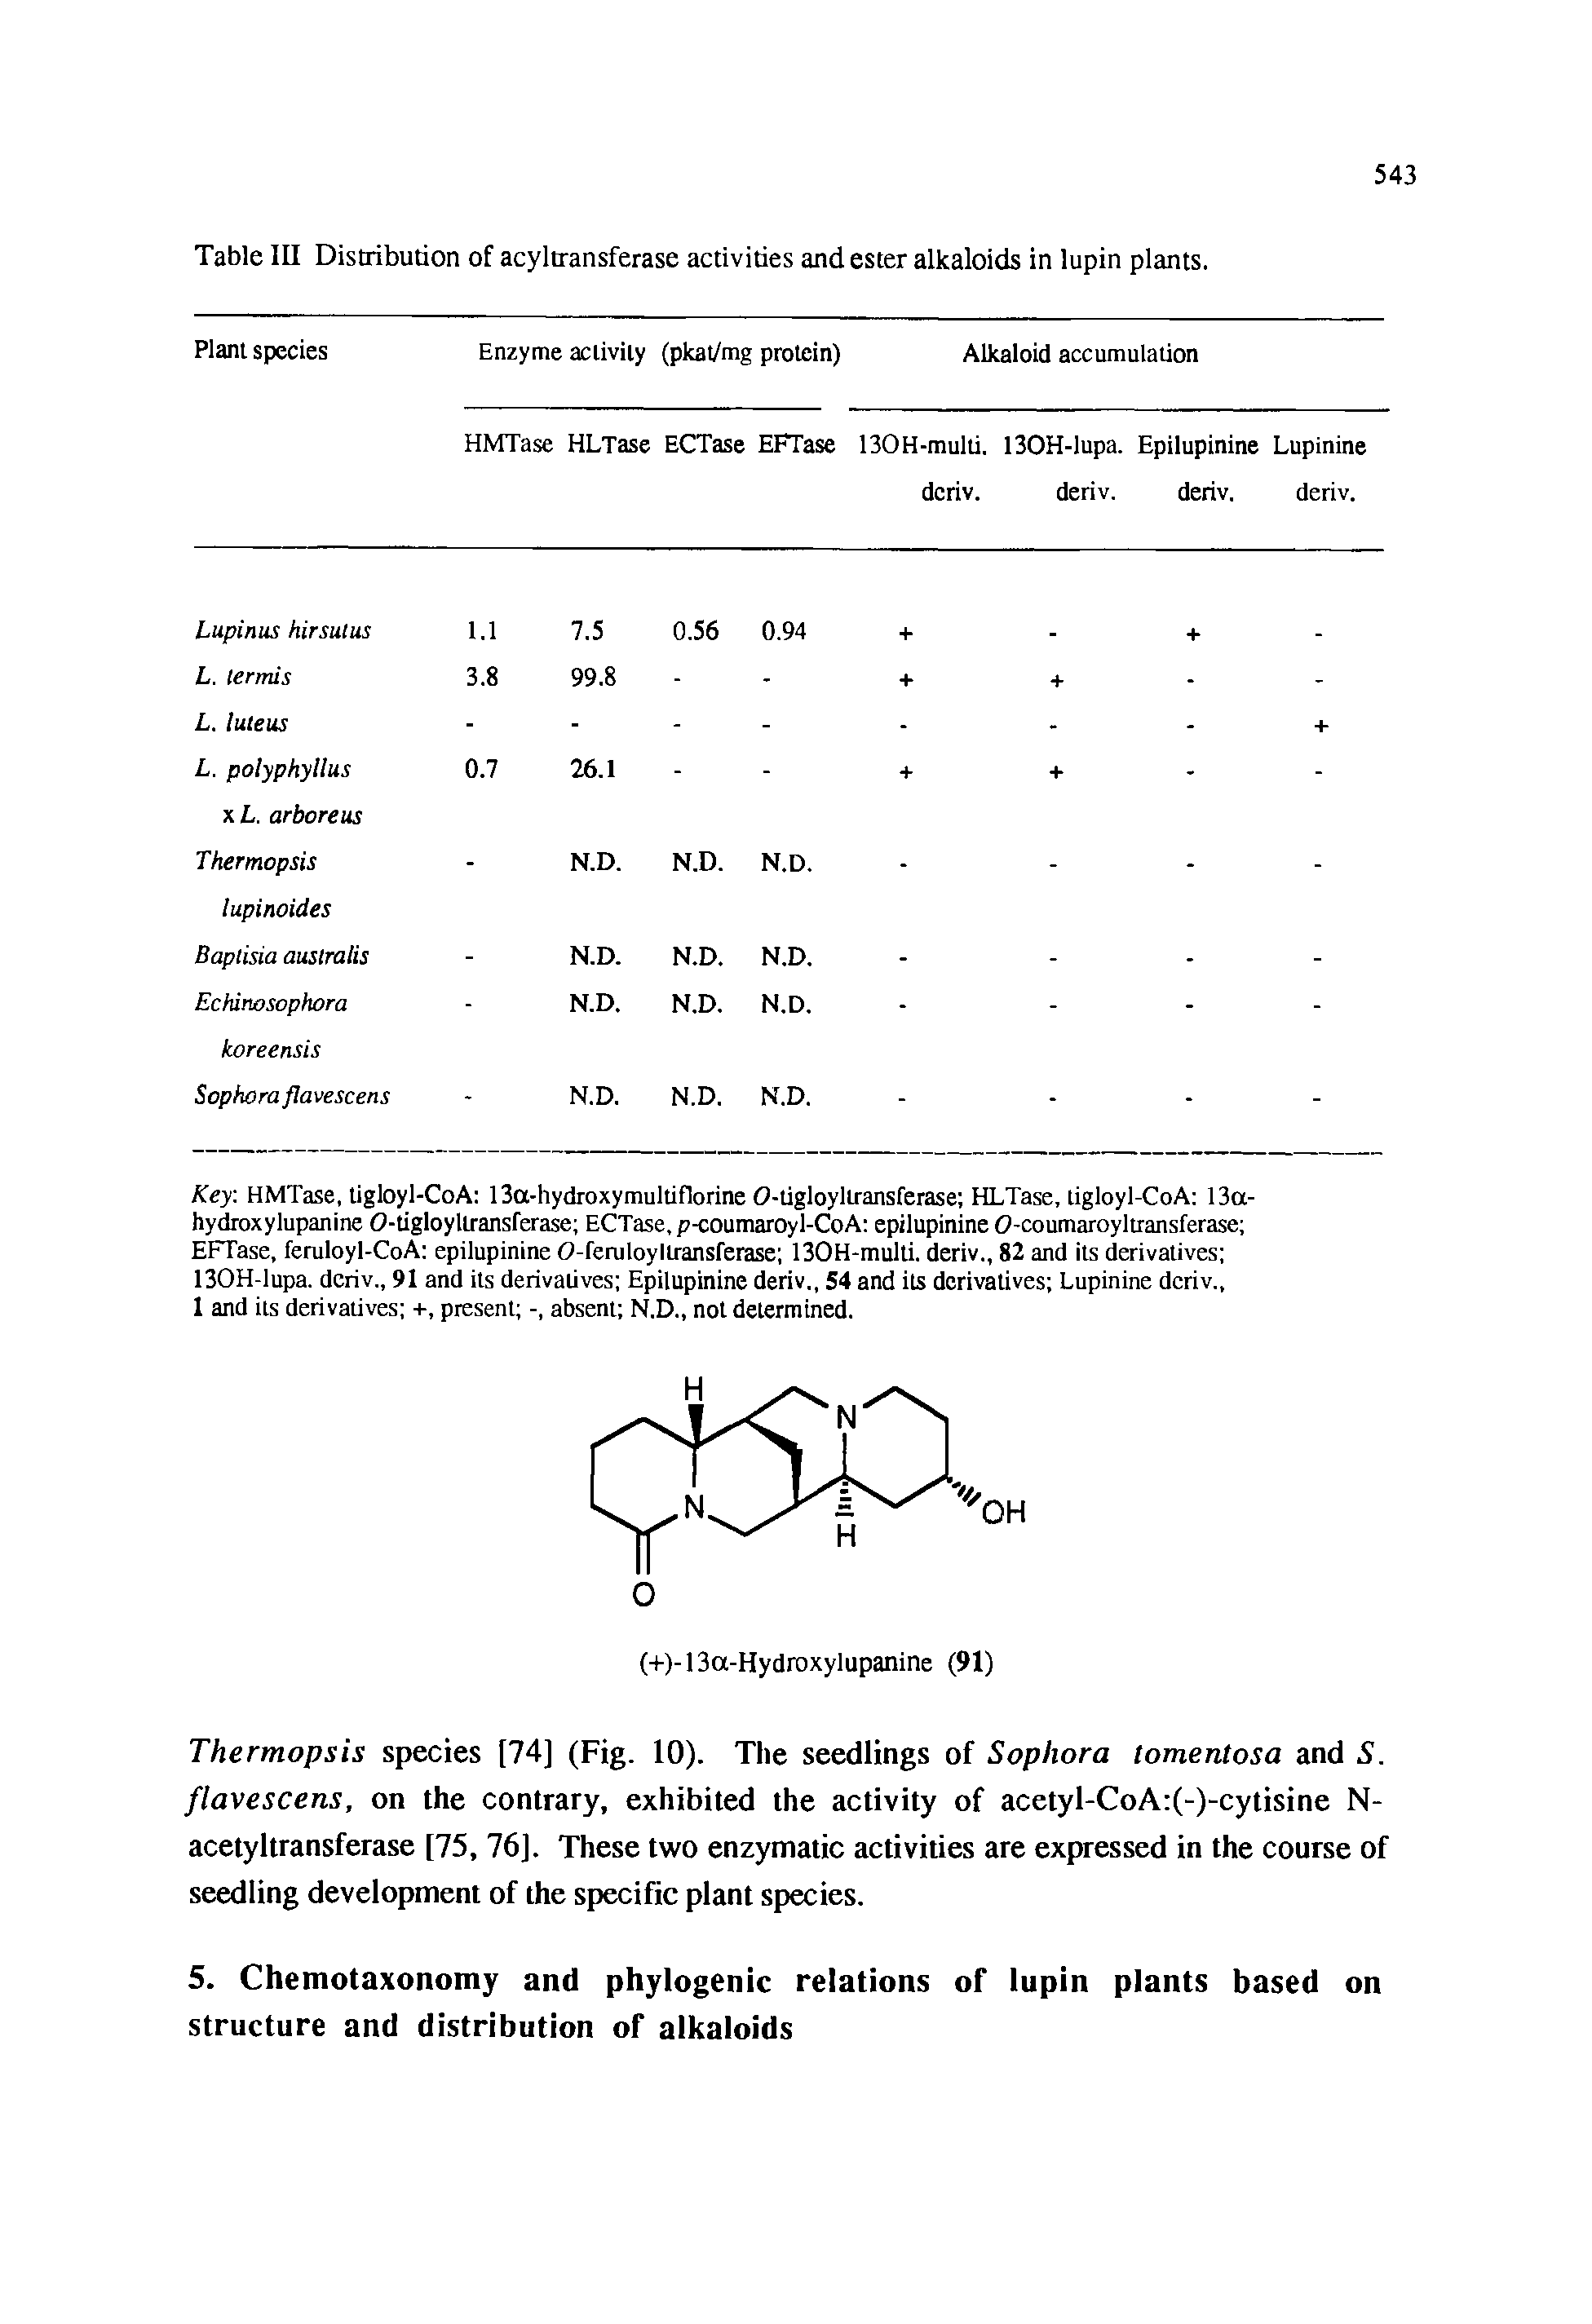 Table III Distribution of acyltransferase activities and ester alkaloids in lupin plants.